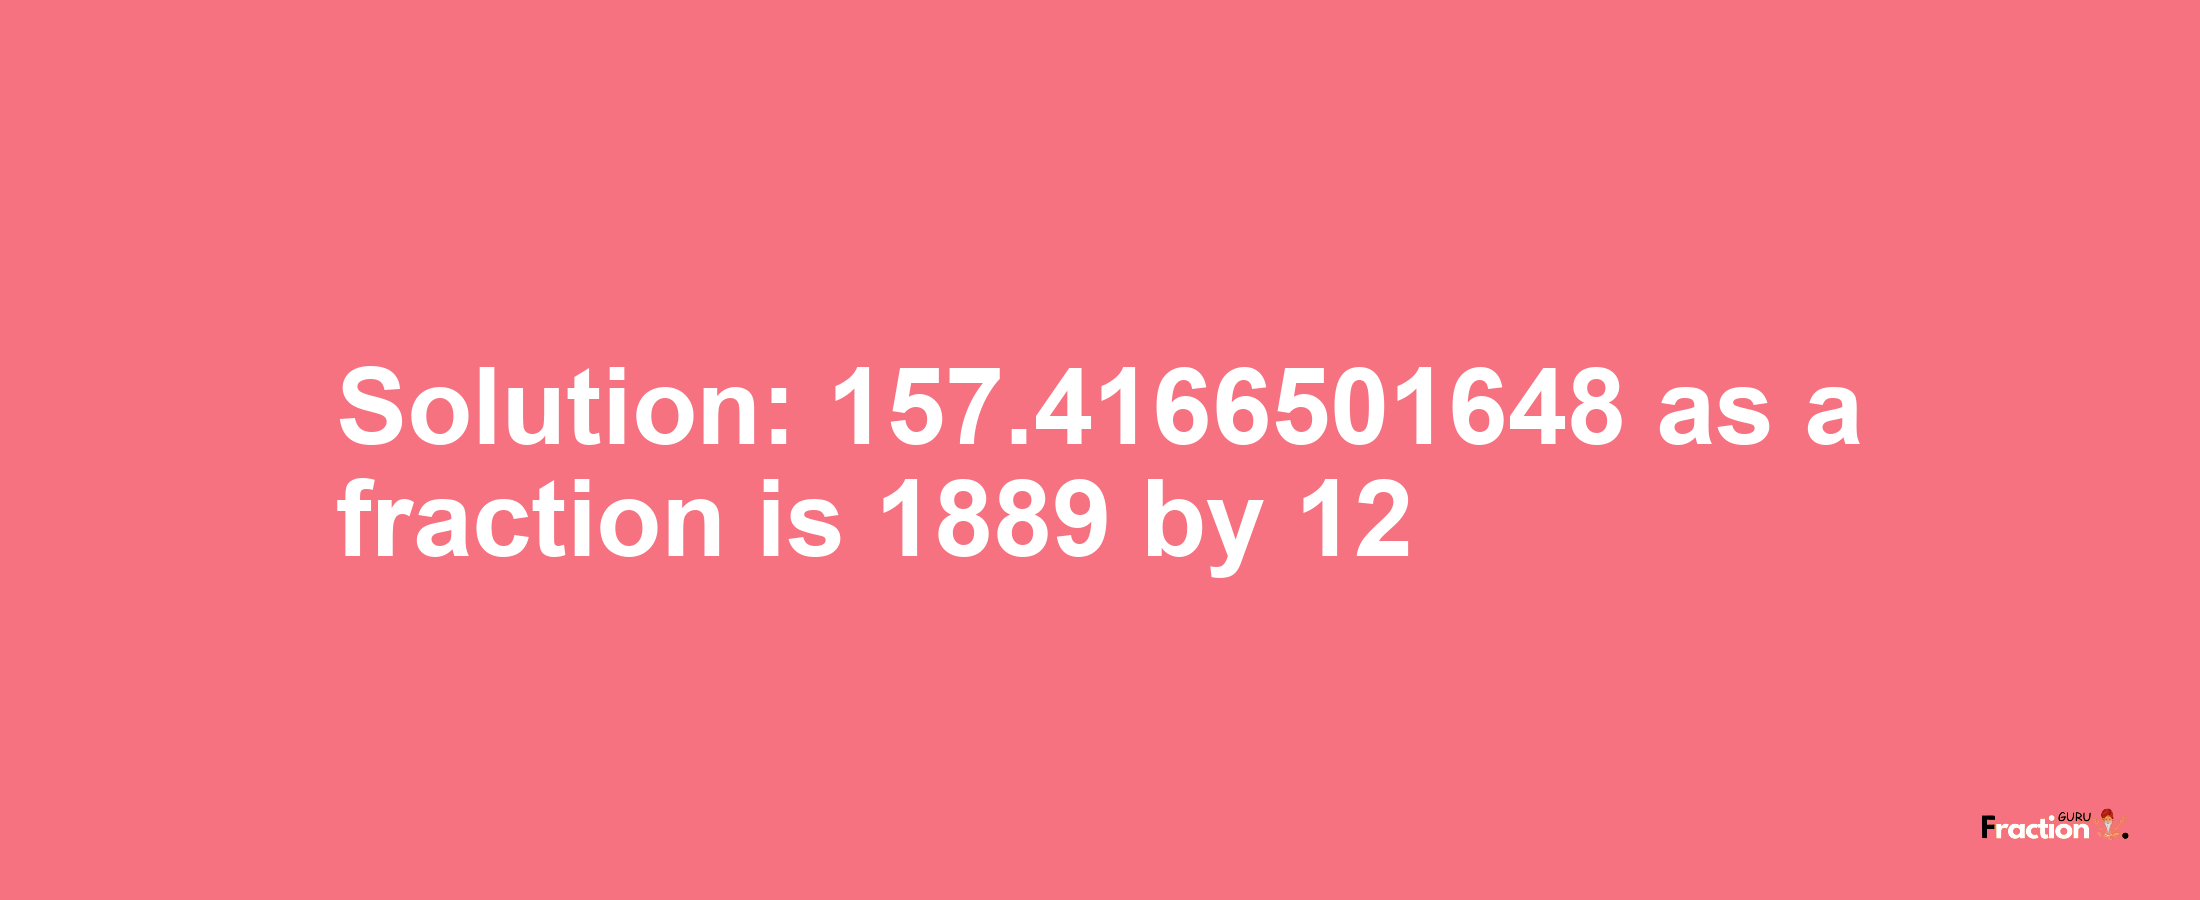 Solution:157.4166501648 as a fraction is 1889/12